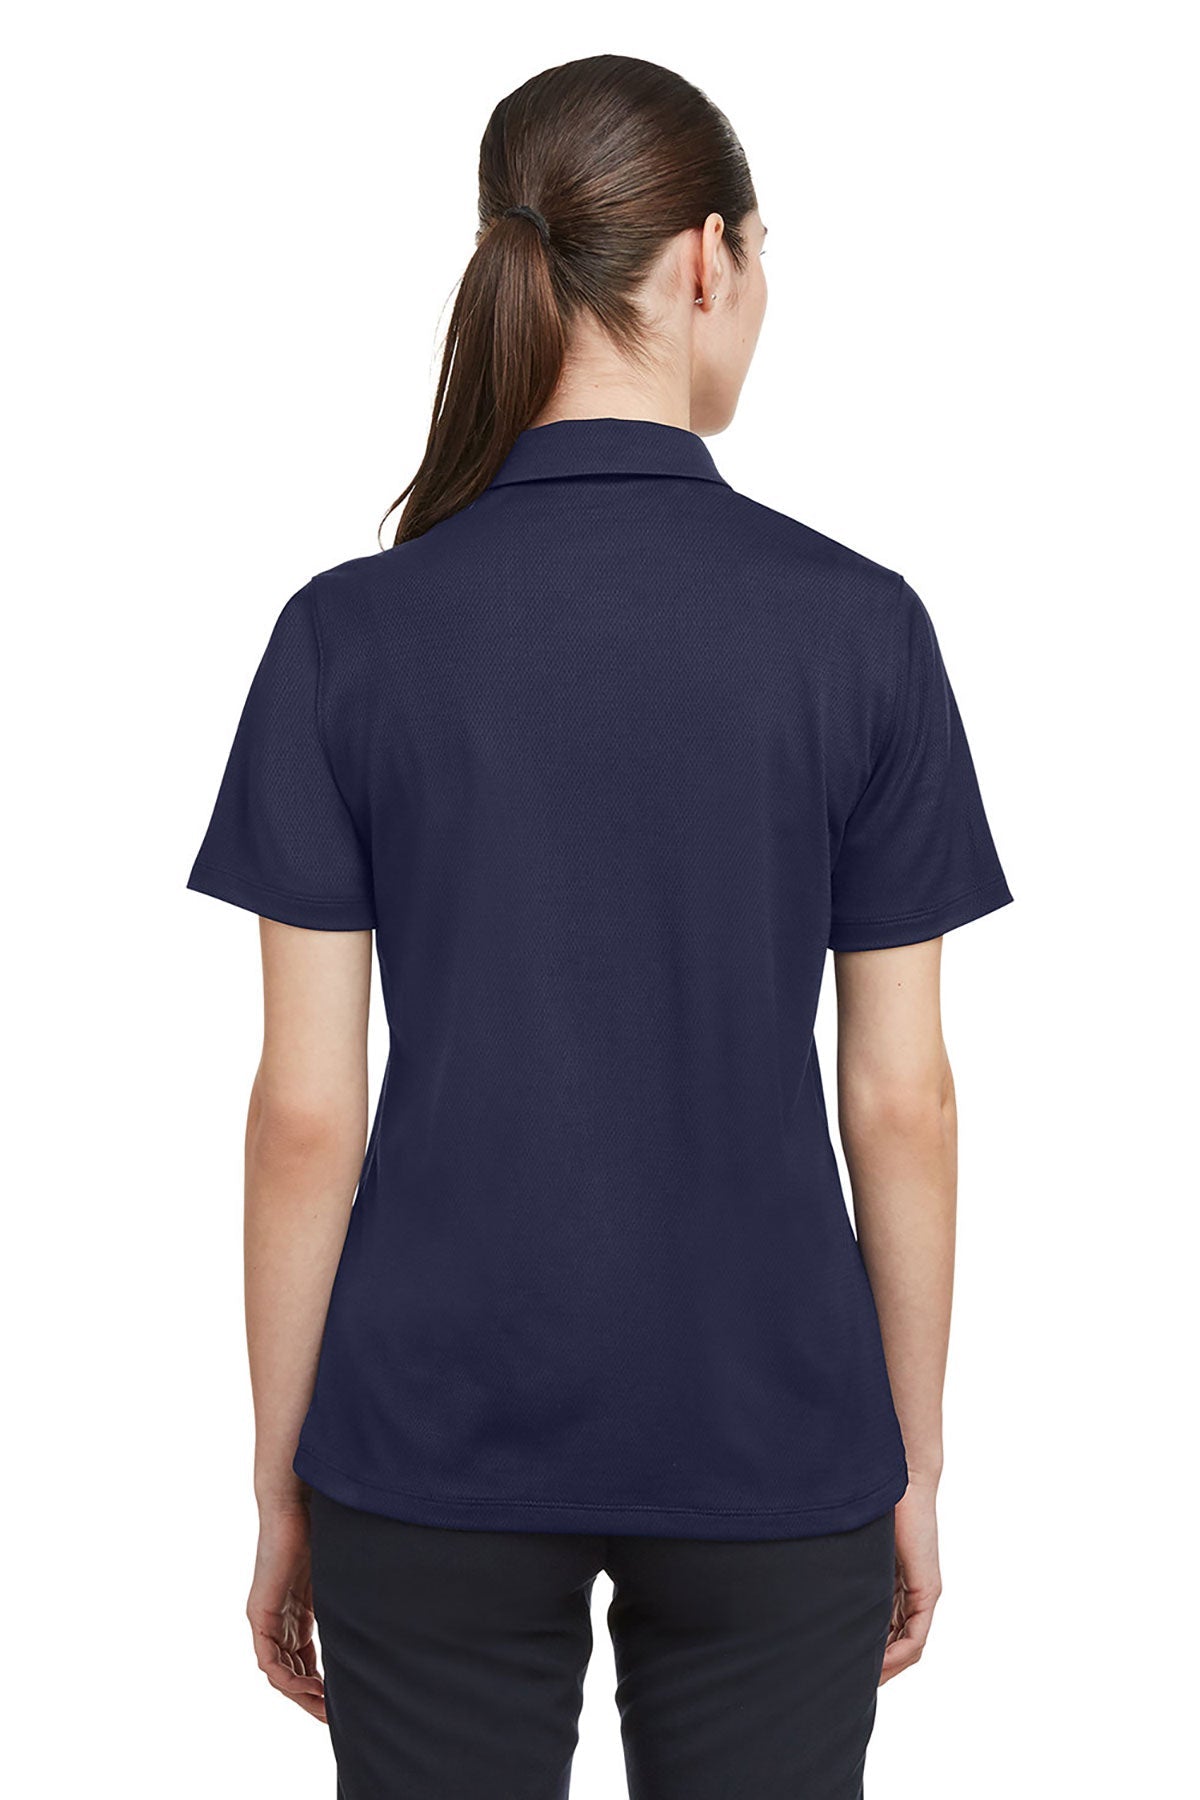 Under Armour Ladies Tech Polo, Mid Navy [GuidePoint Security]